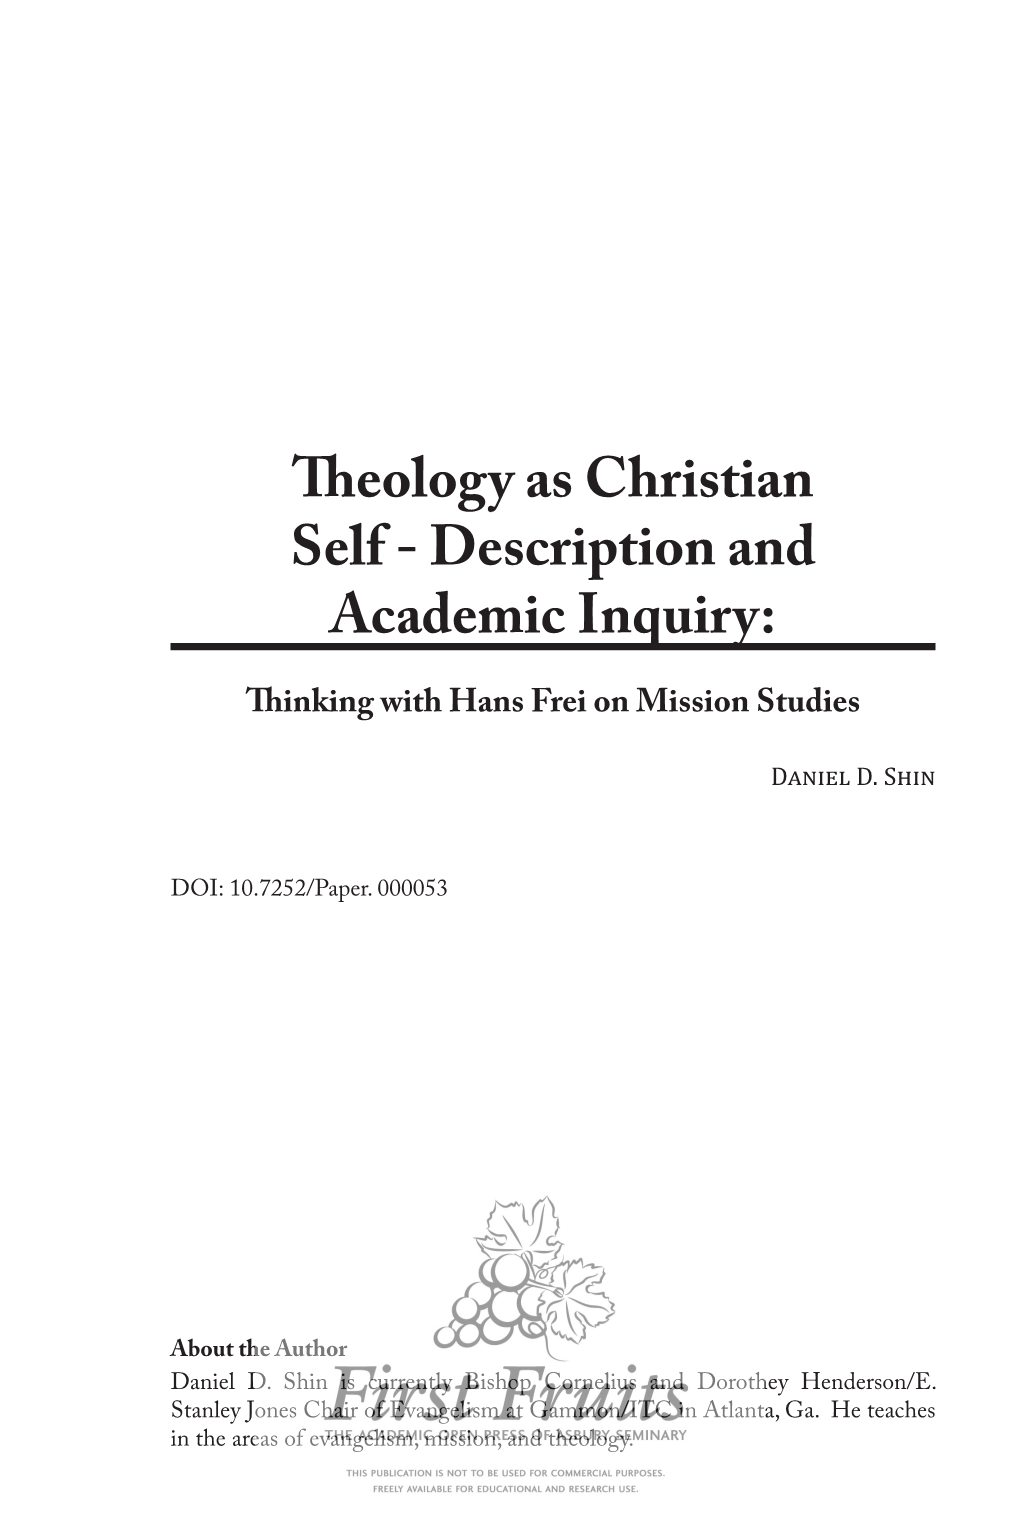 Theology As Christian Self - Description and Academic Inquiry